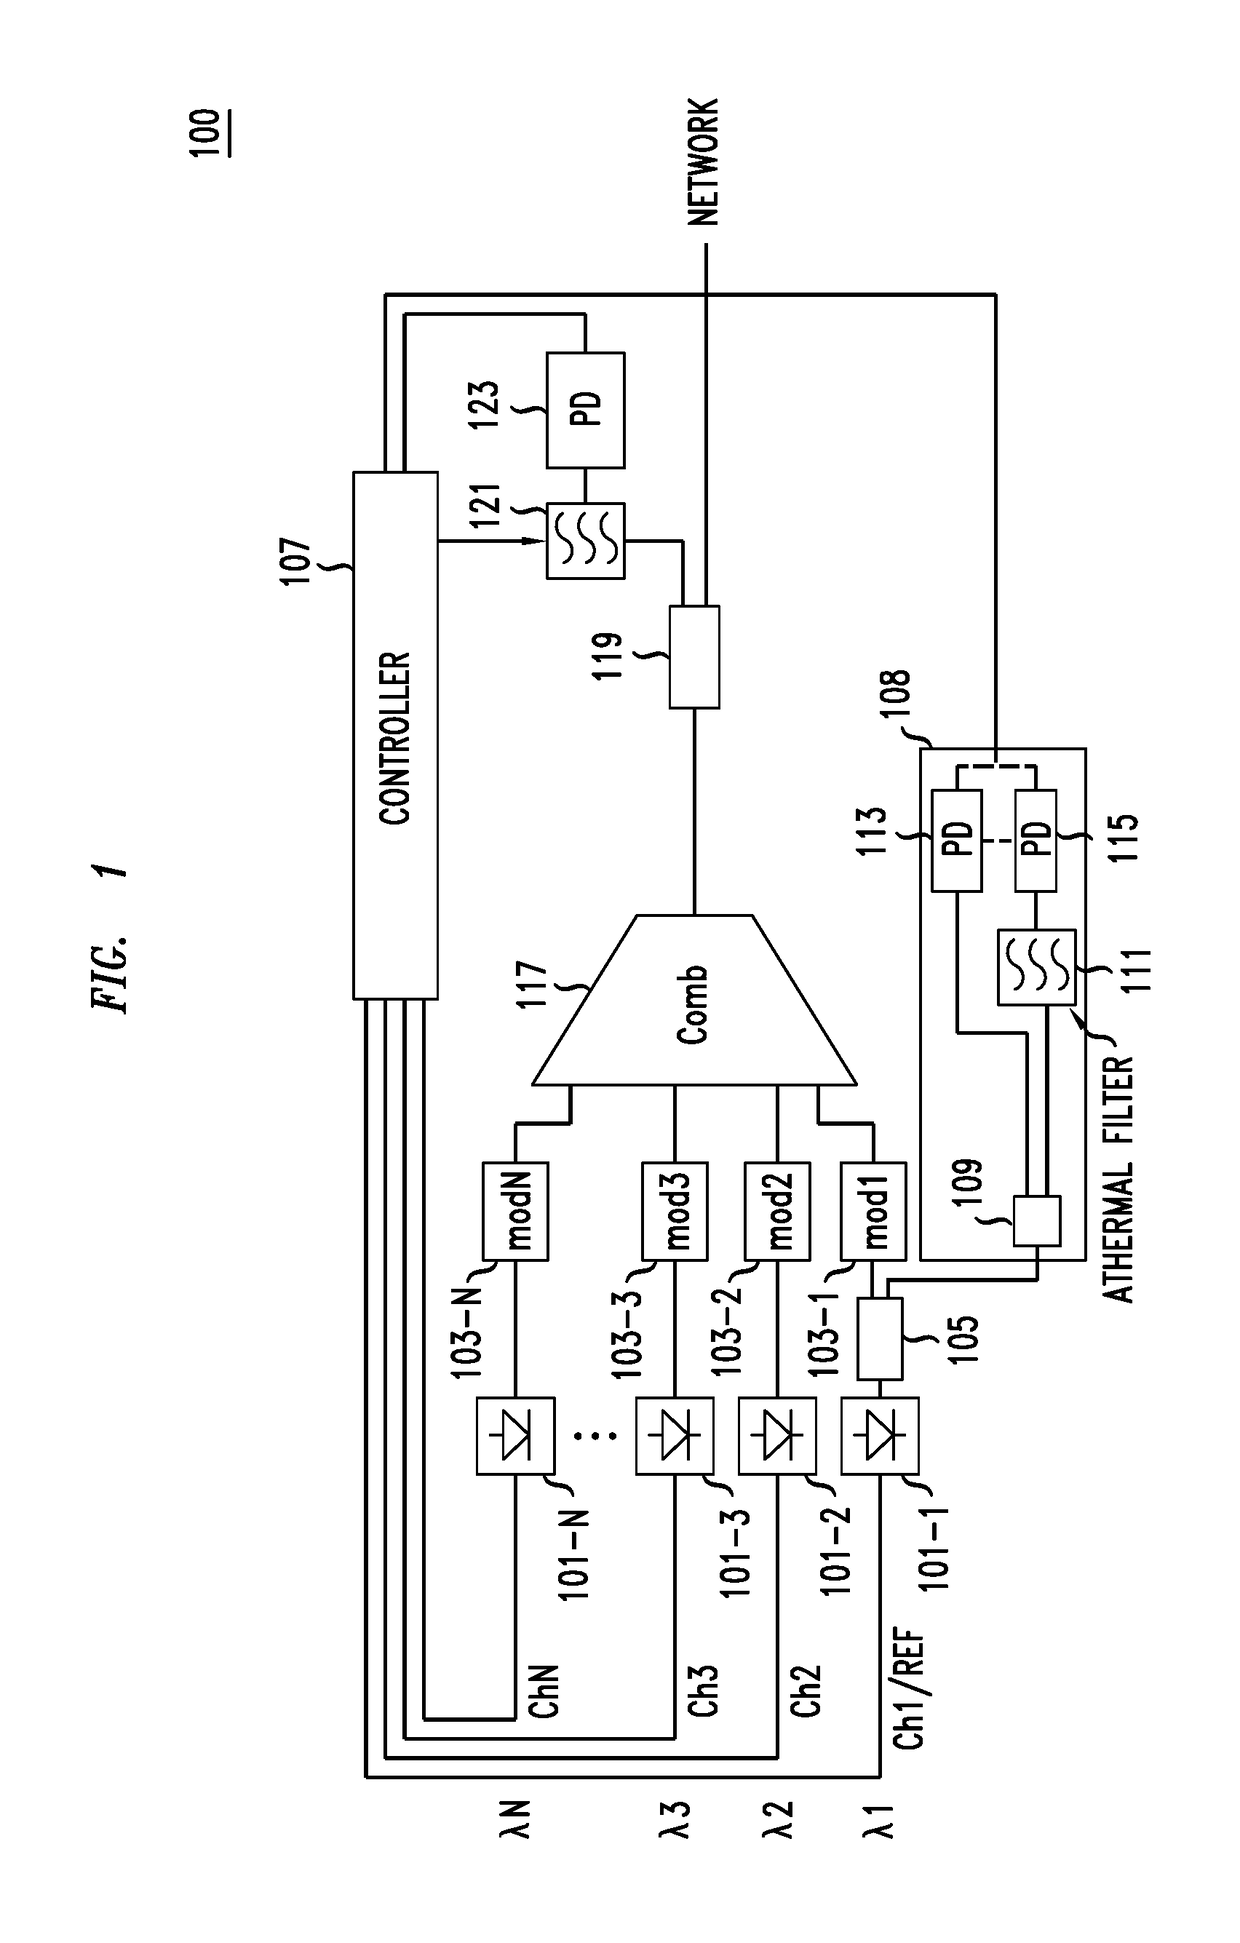 Method and apparatus for locking WDM transmitter carriers to a defined grid